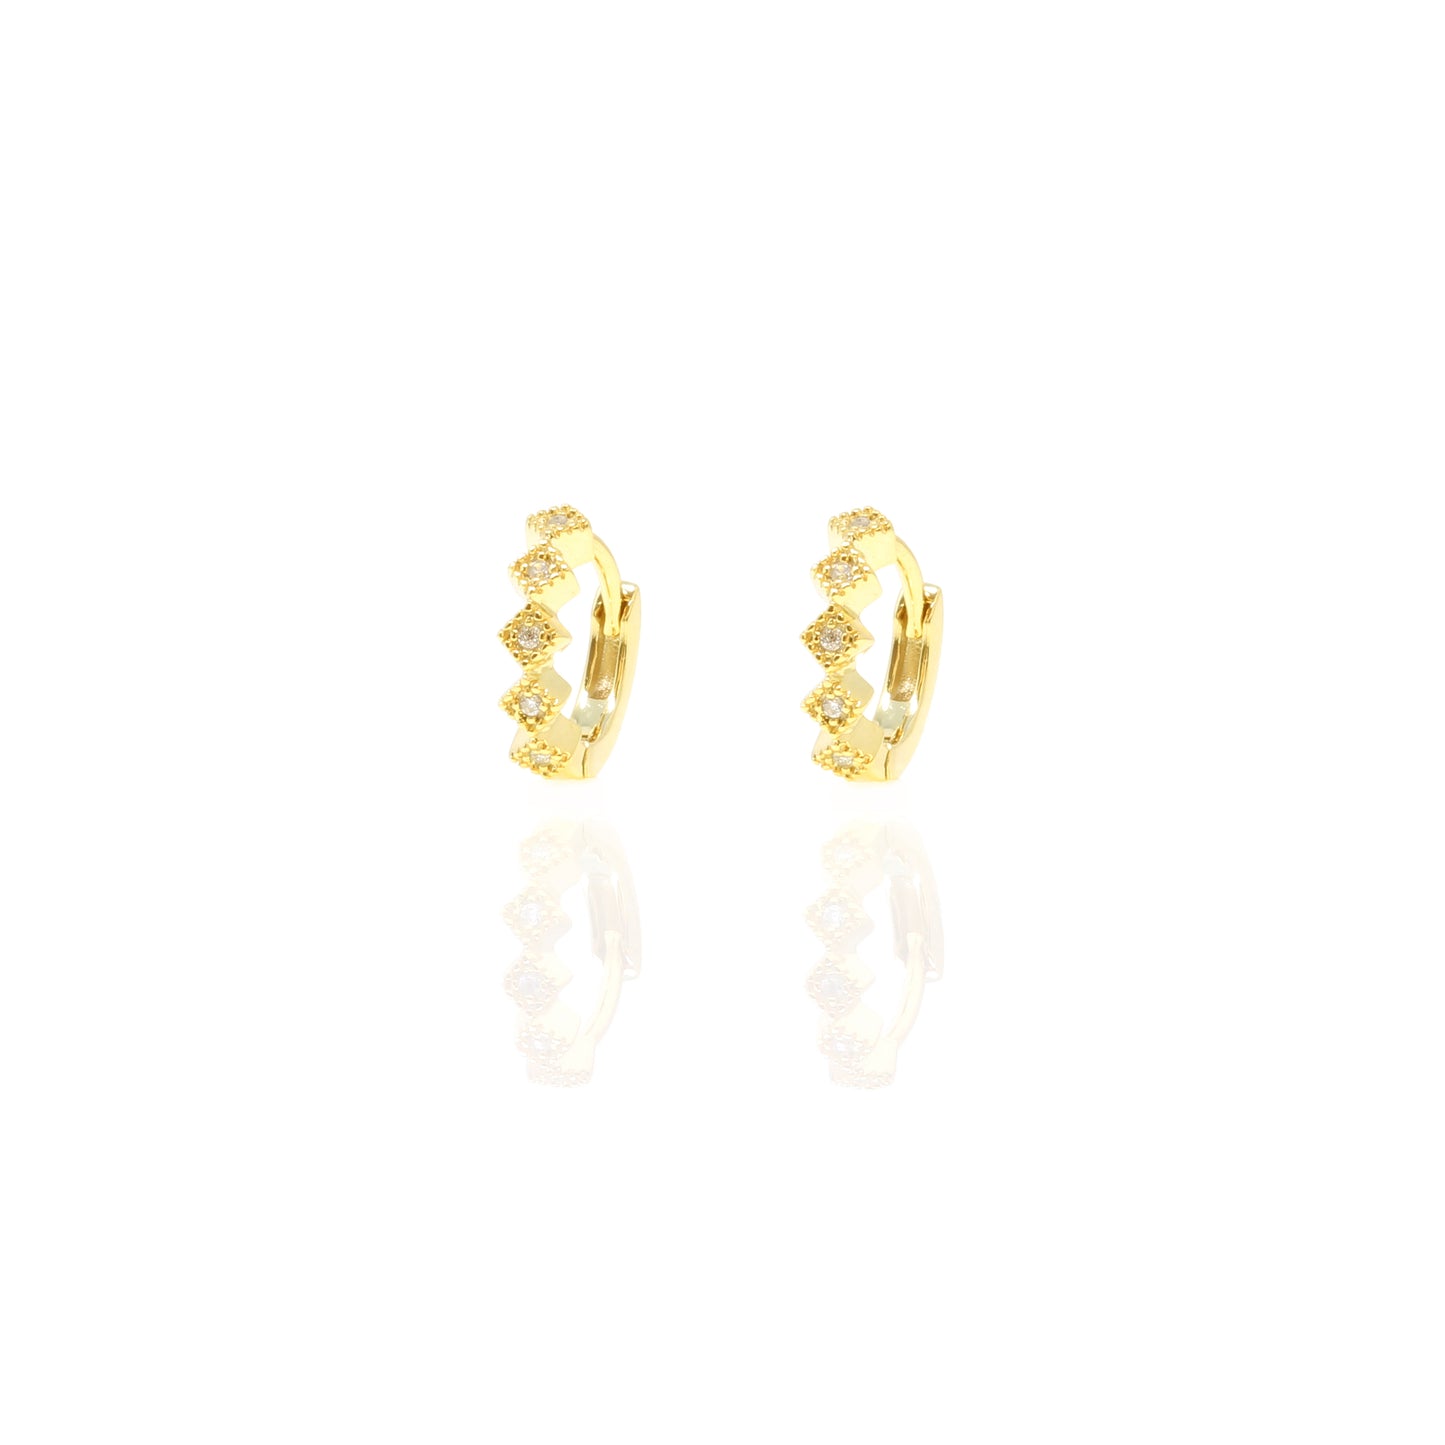 EF-2/G - Gold Huggies with Square Cut Cubic Zirconia